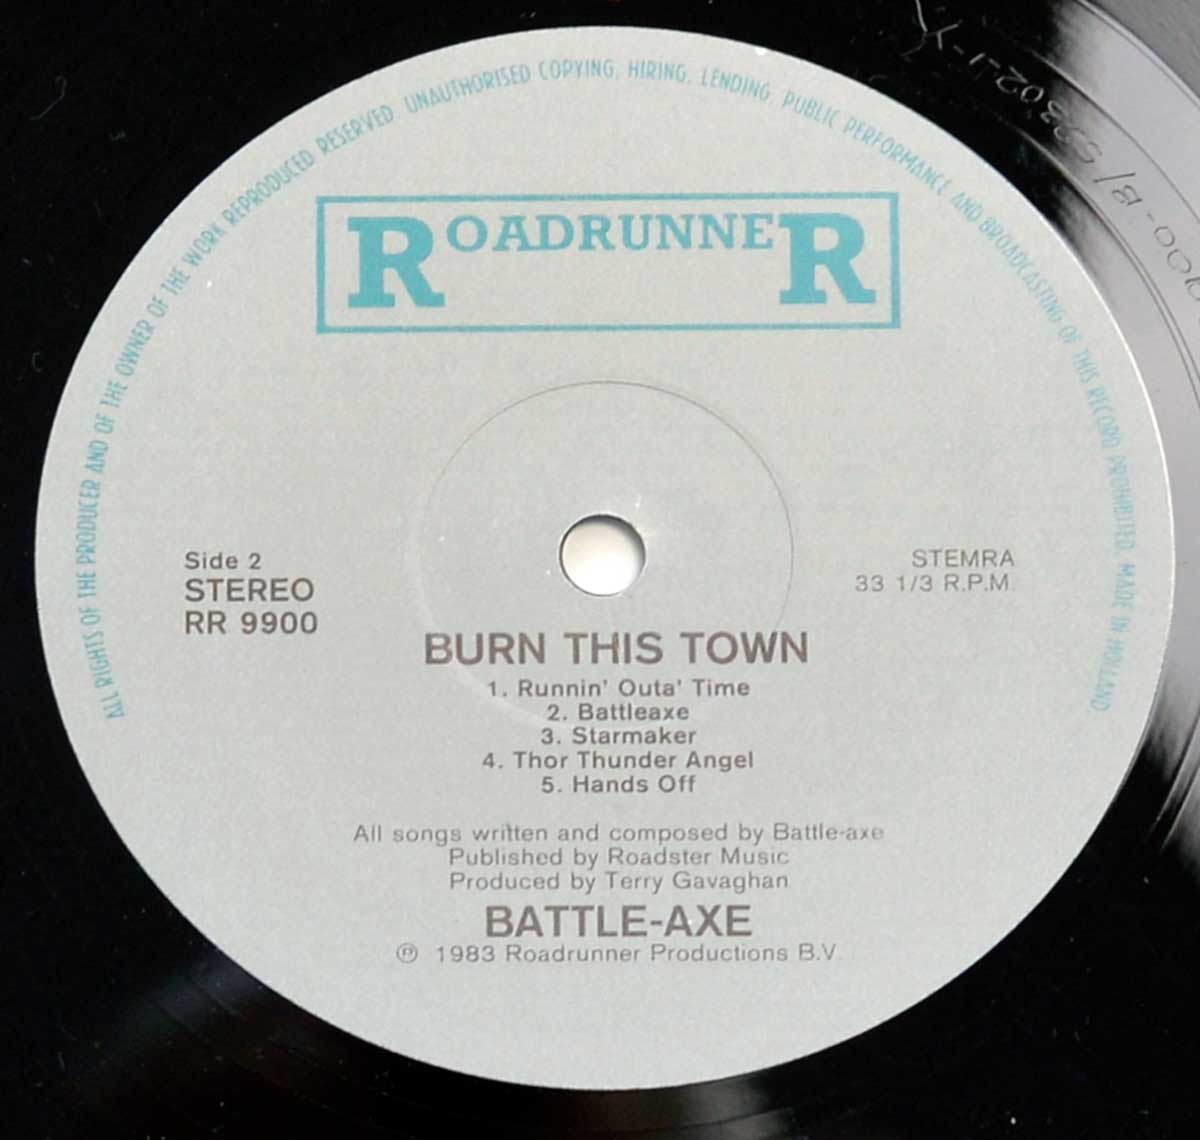 Enlarged High Resolution Photo of the Record's label BATTLEAXE Burn This Town https://vinyl-records.nl